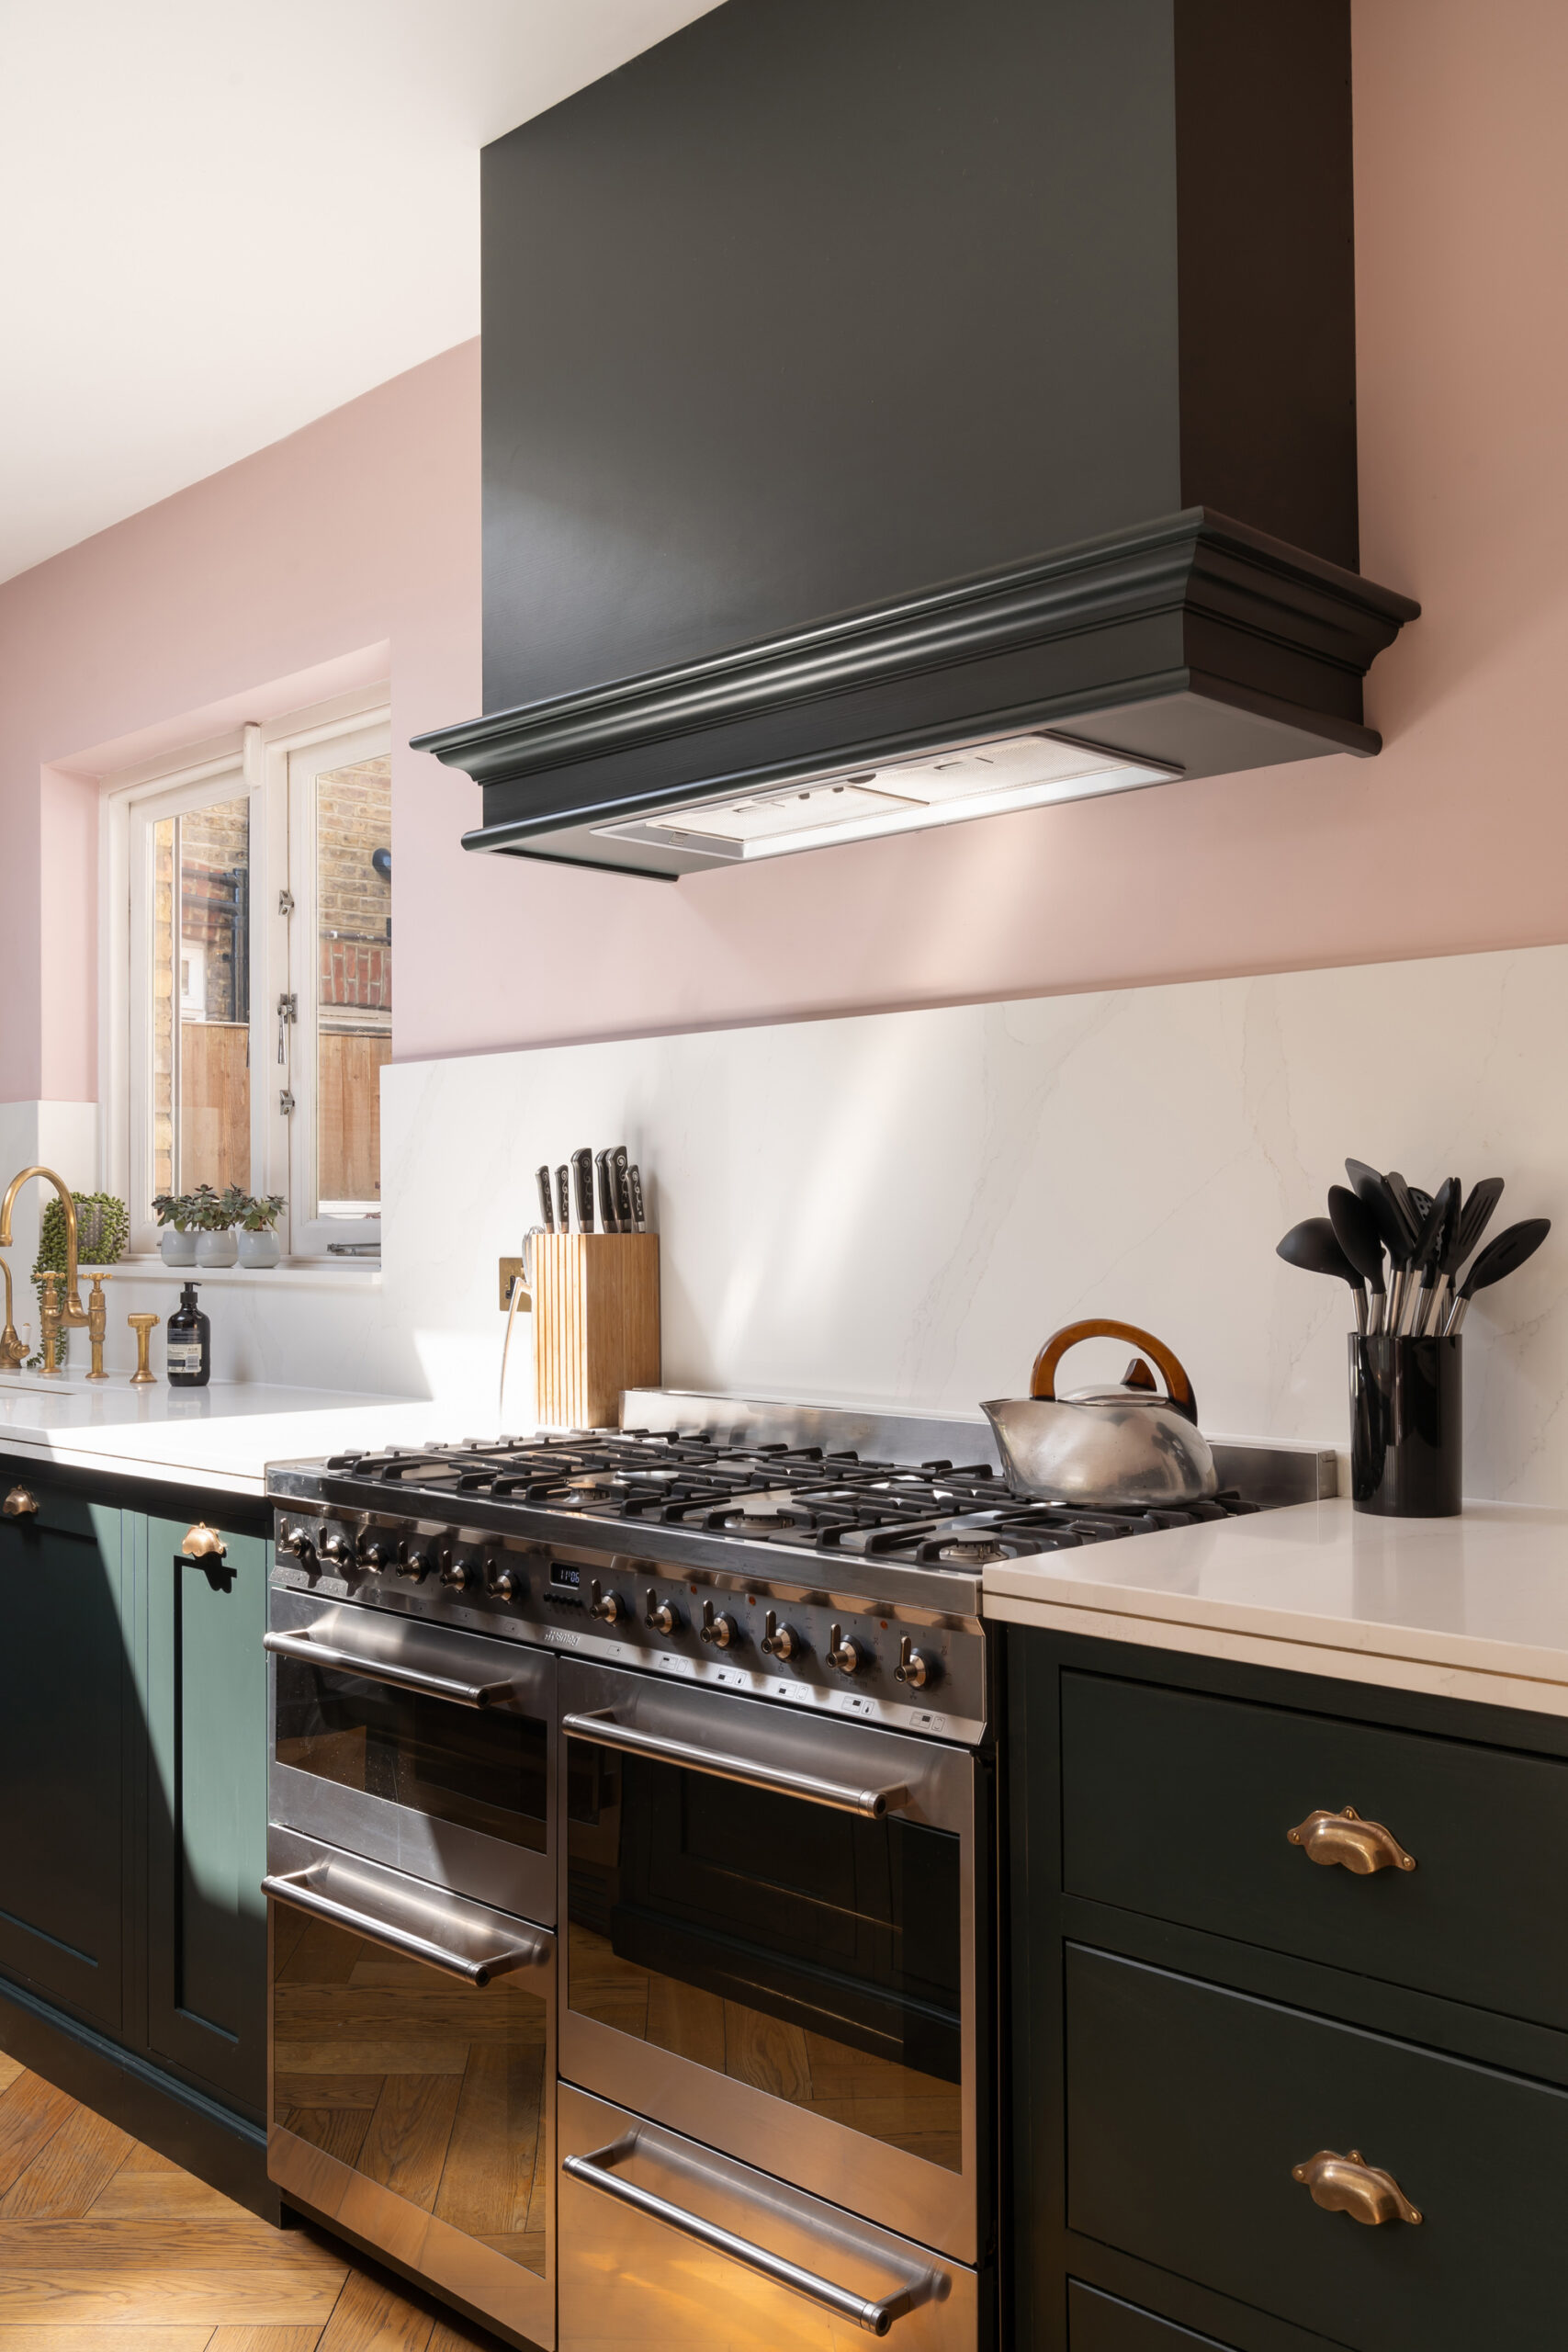 A modern kitchen with a pastel pink backdrop